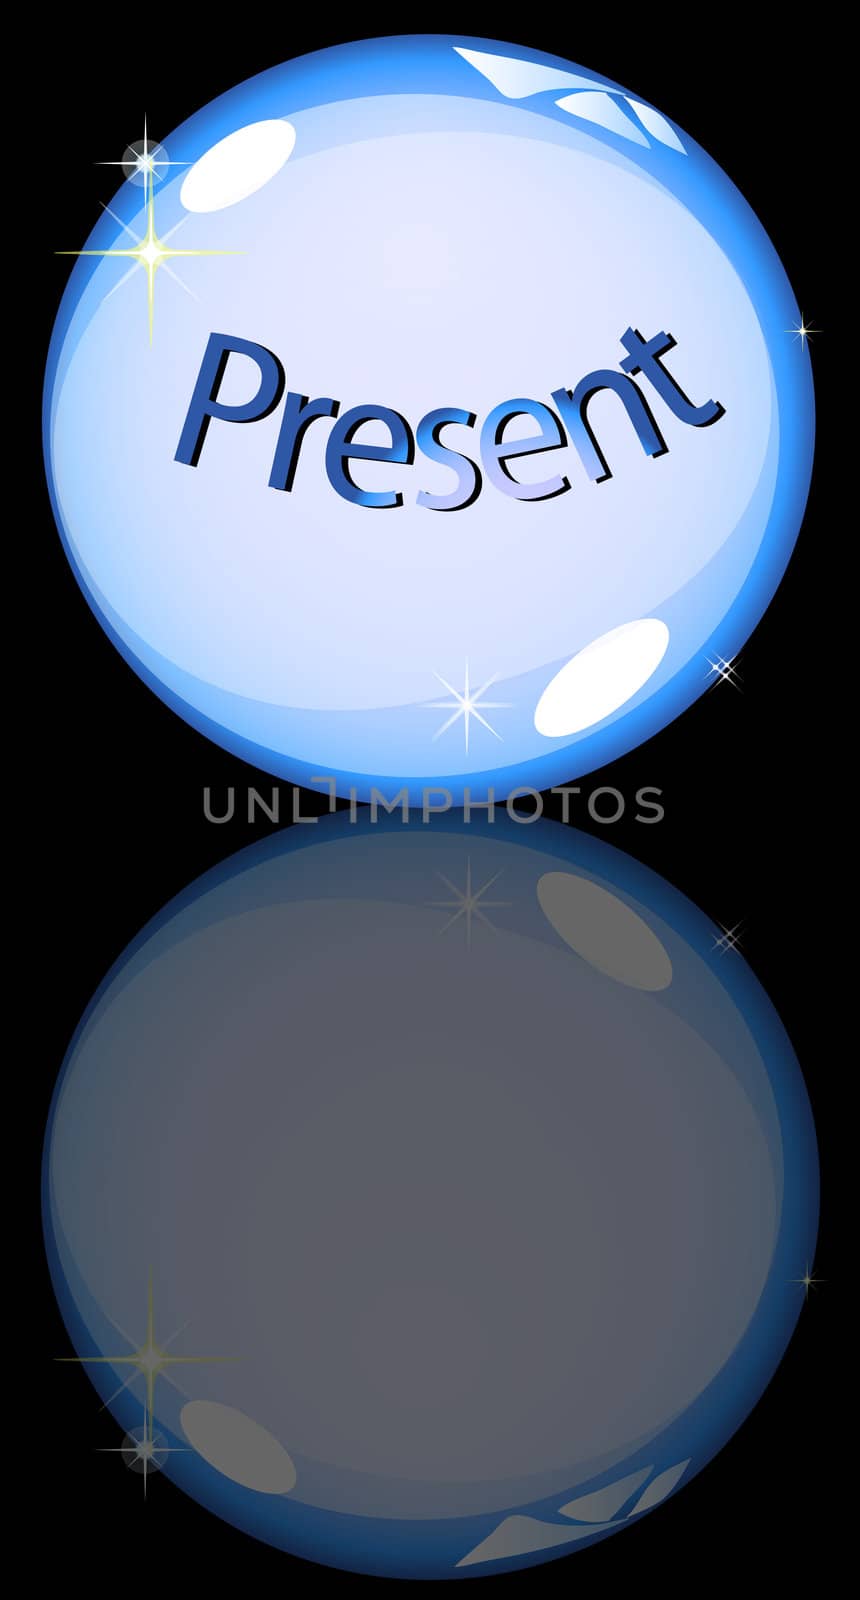 Crystal Ball Present by peromarketing